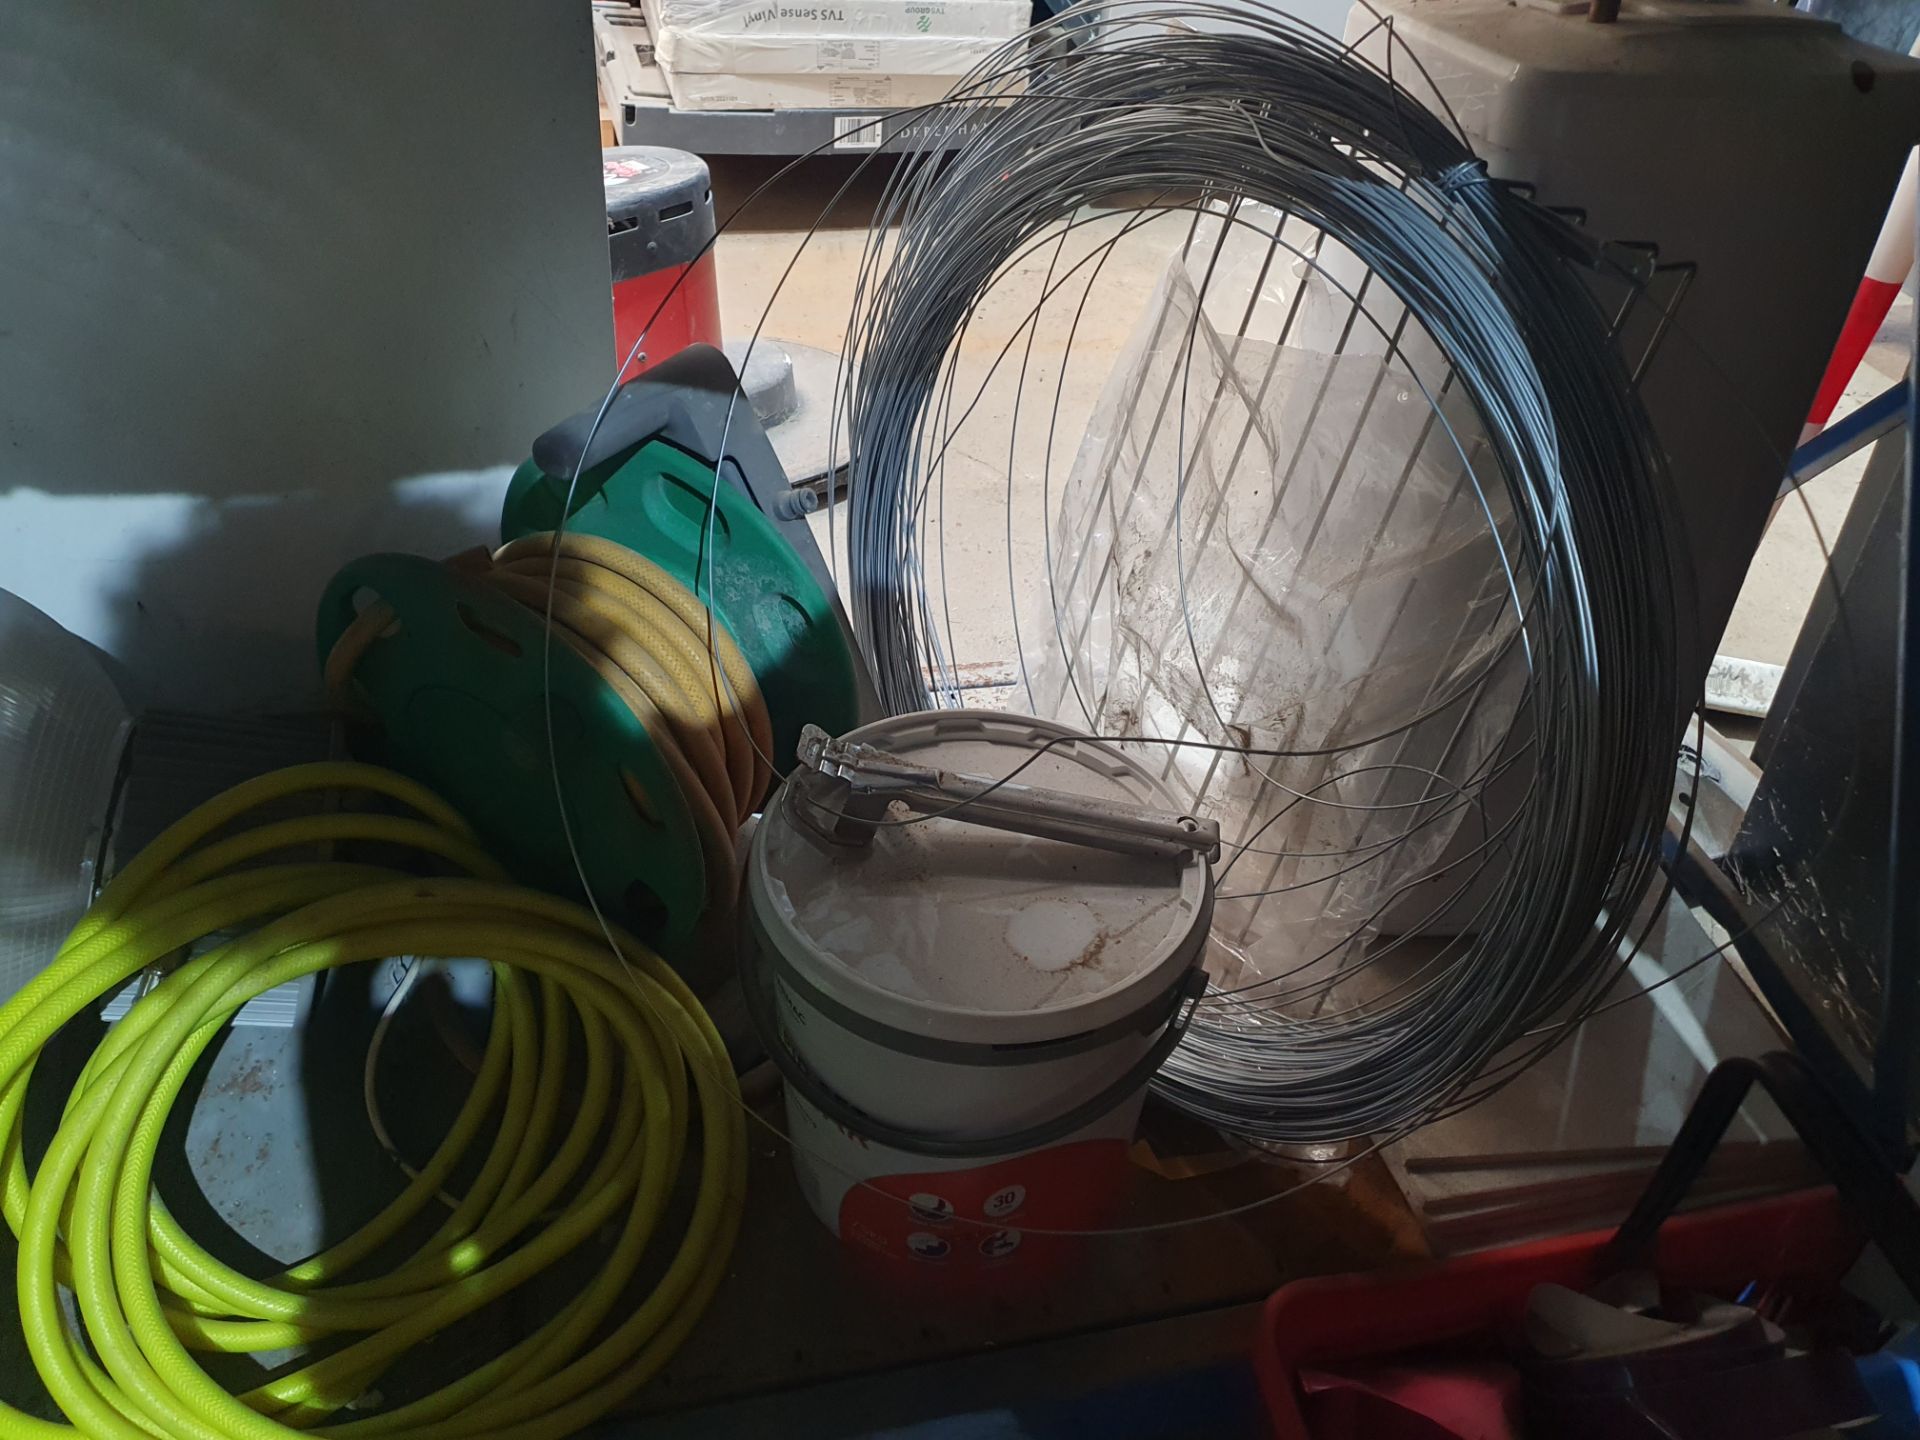 *contents of bottom shelf - water heater, wire, airlines, light fitting - Image 2 of 3